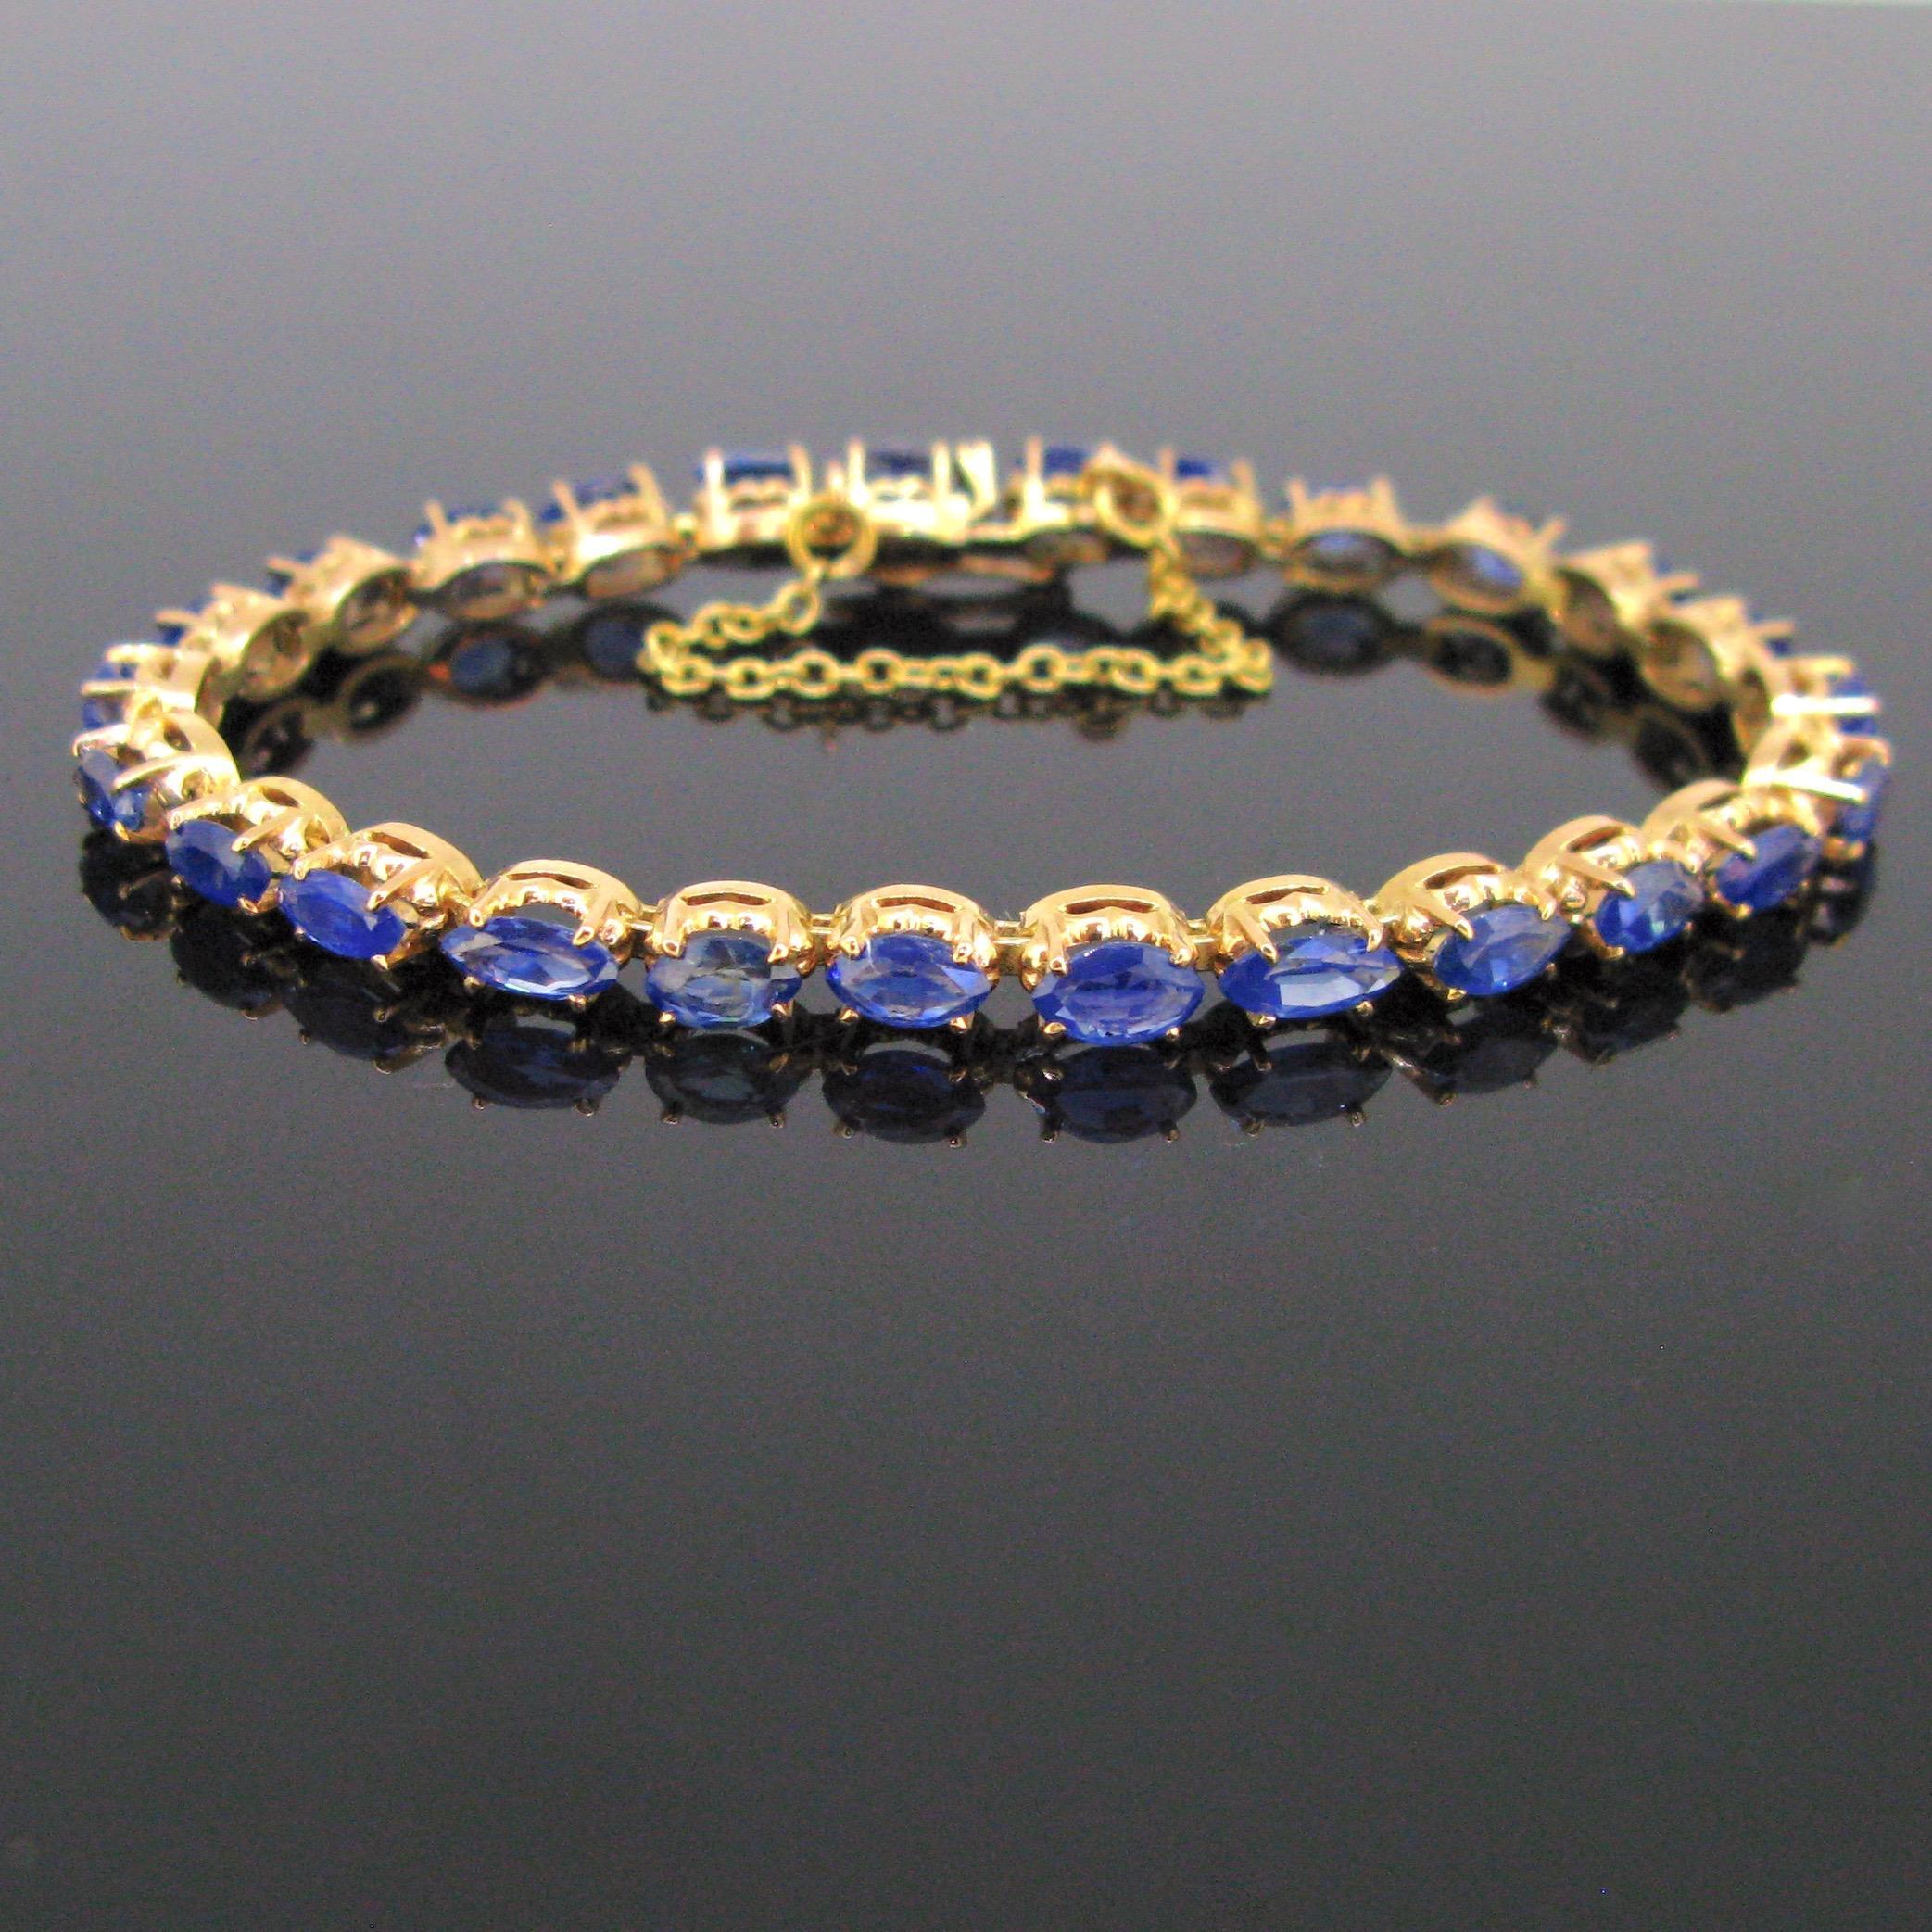 Weight:	11.67gr


Metal:		18kt yellow and rose gold


Stones:	26 Sapphires
•	Cut:	Navette
•	Total carat weight:	4ct approximately


Hallmarks: 	18K
	French, eagle’s head 


Condition:	Very Good


Comments:	This bracelet is set with 26 navette cut